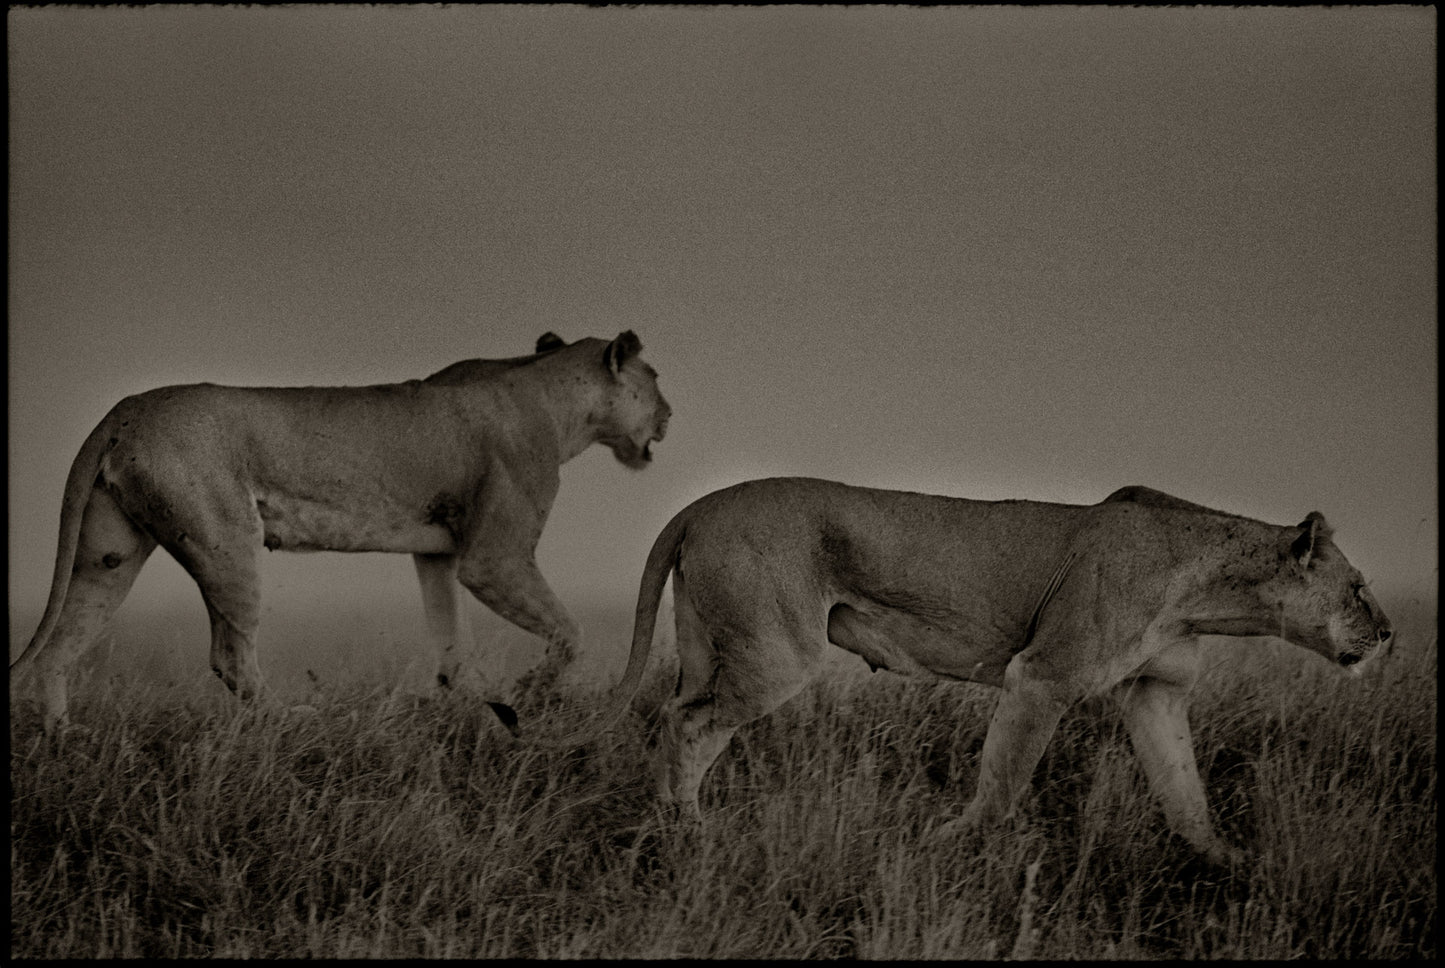 Two Lionesses Stalking at Dusk